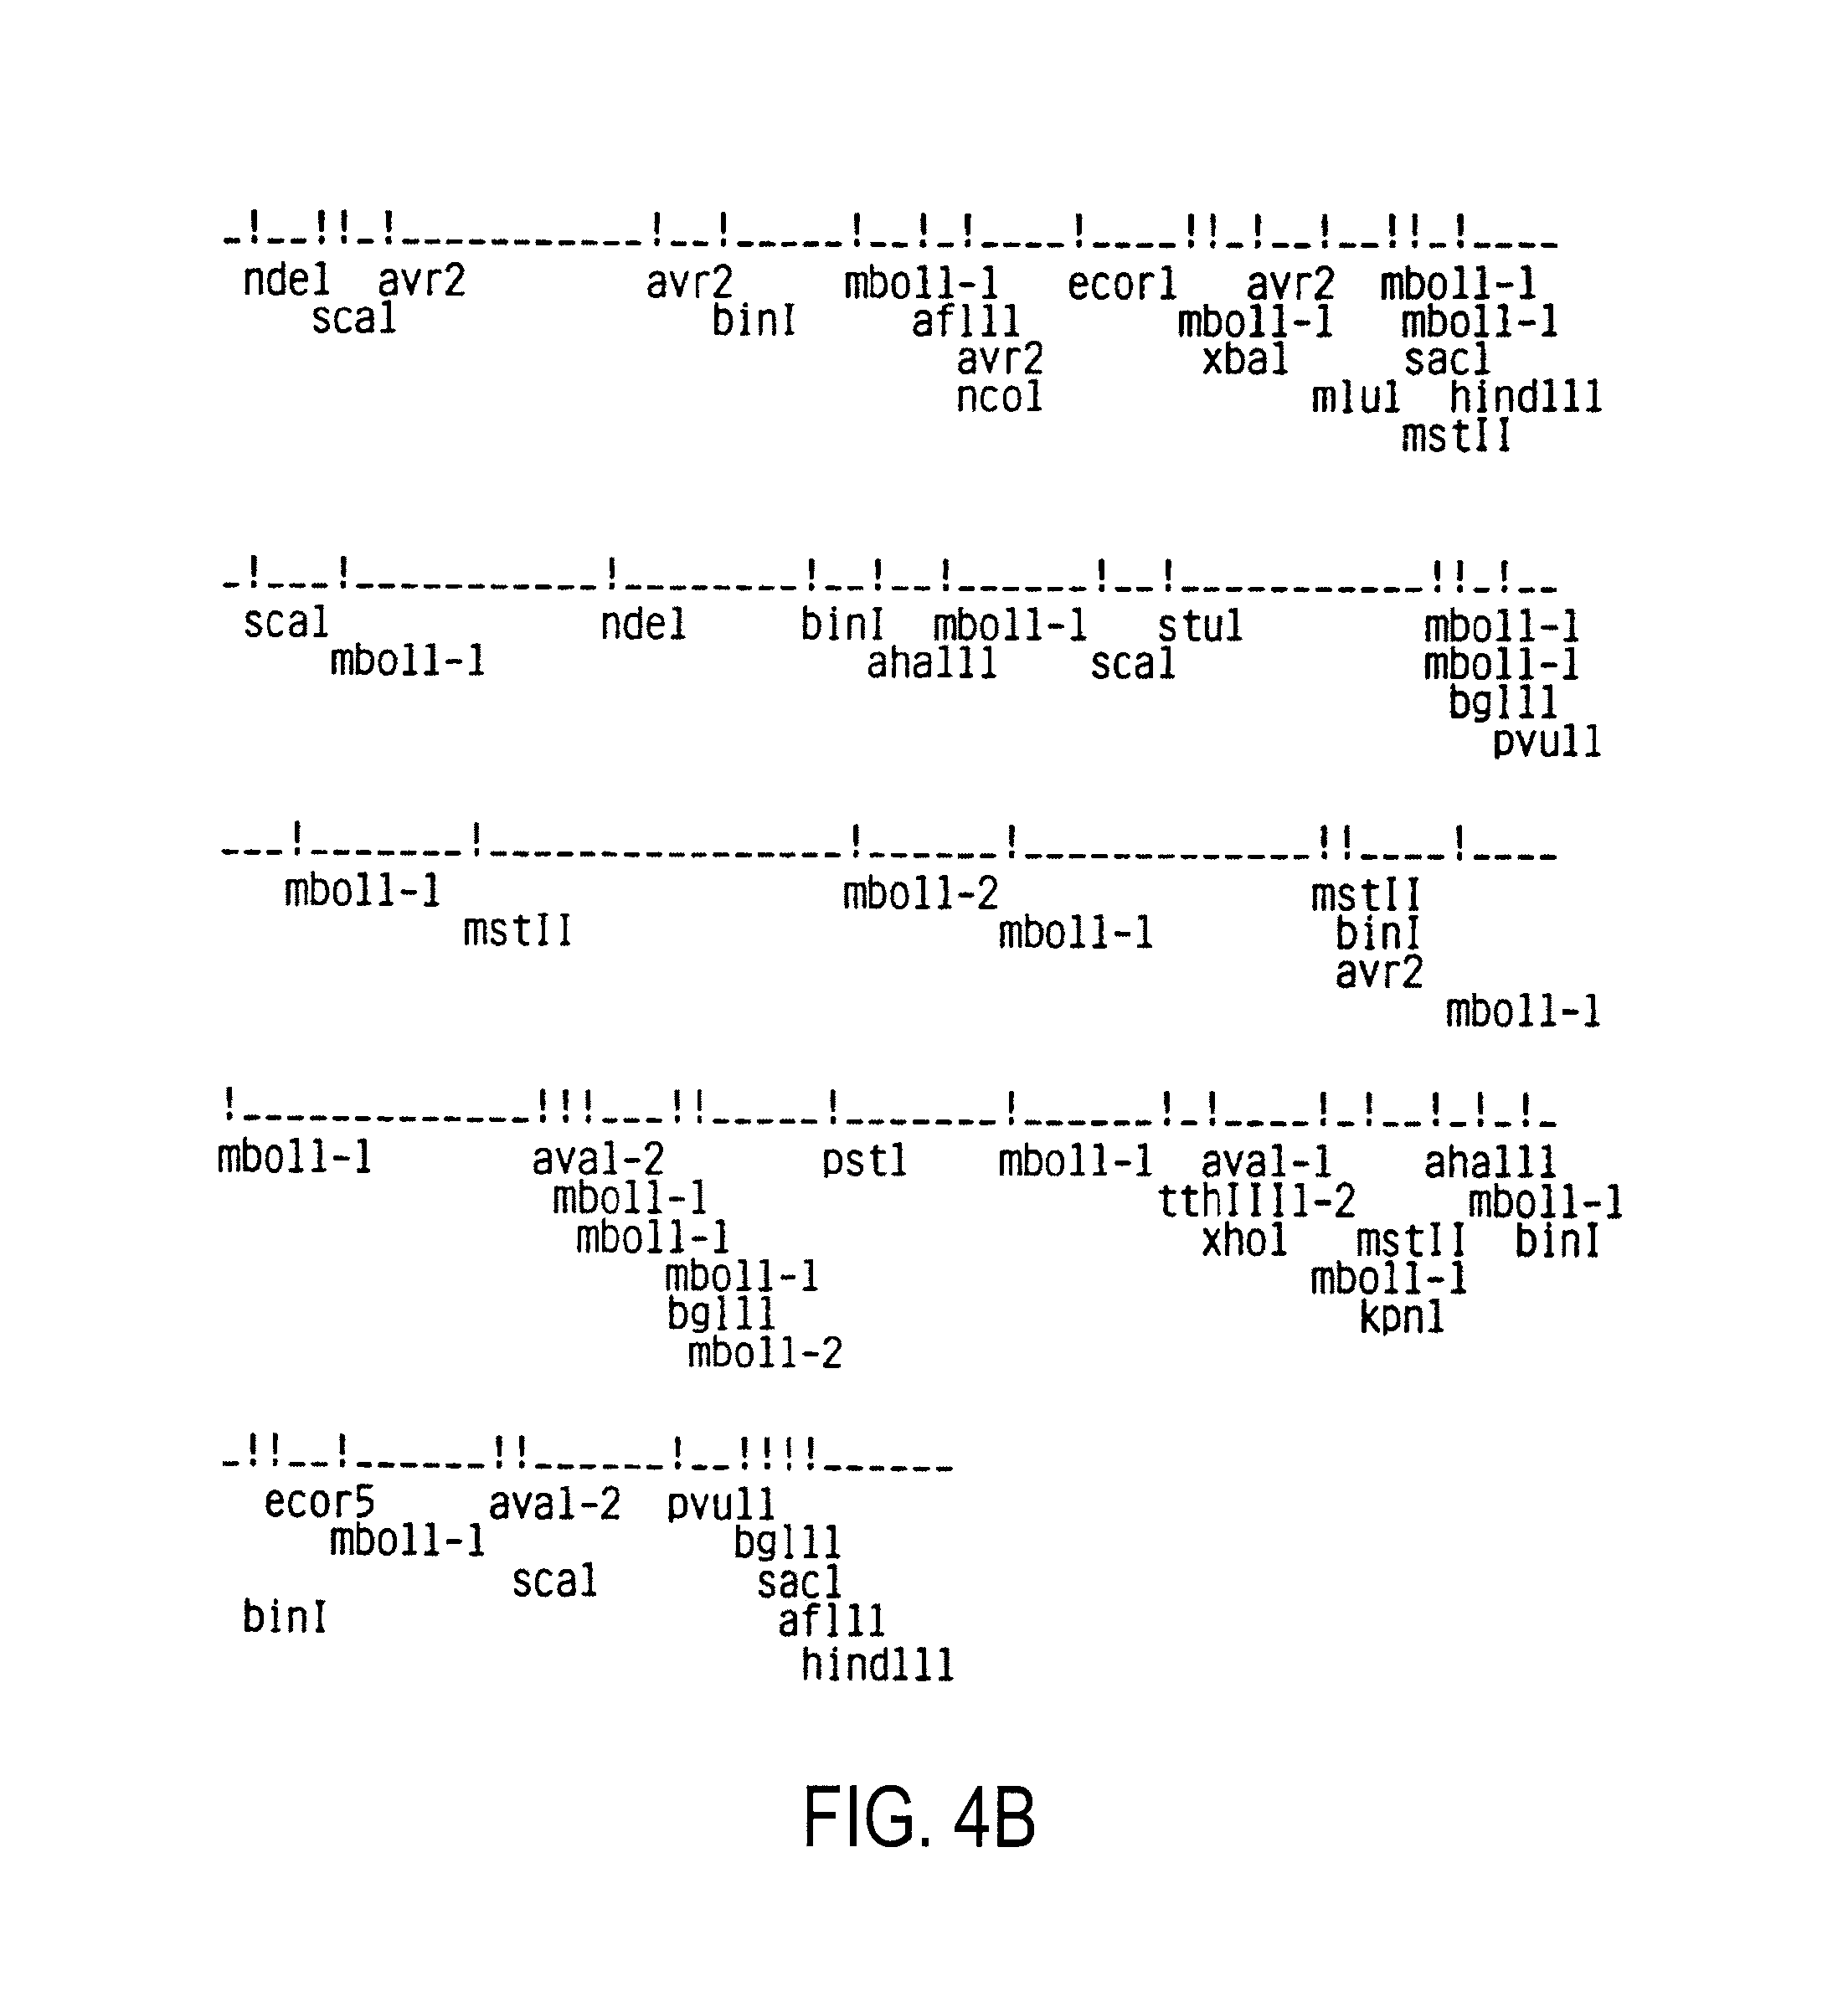 Human immunodeficiency virus (HIV) nucleotide sequences